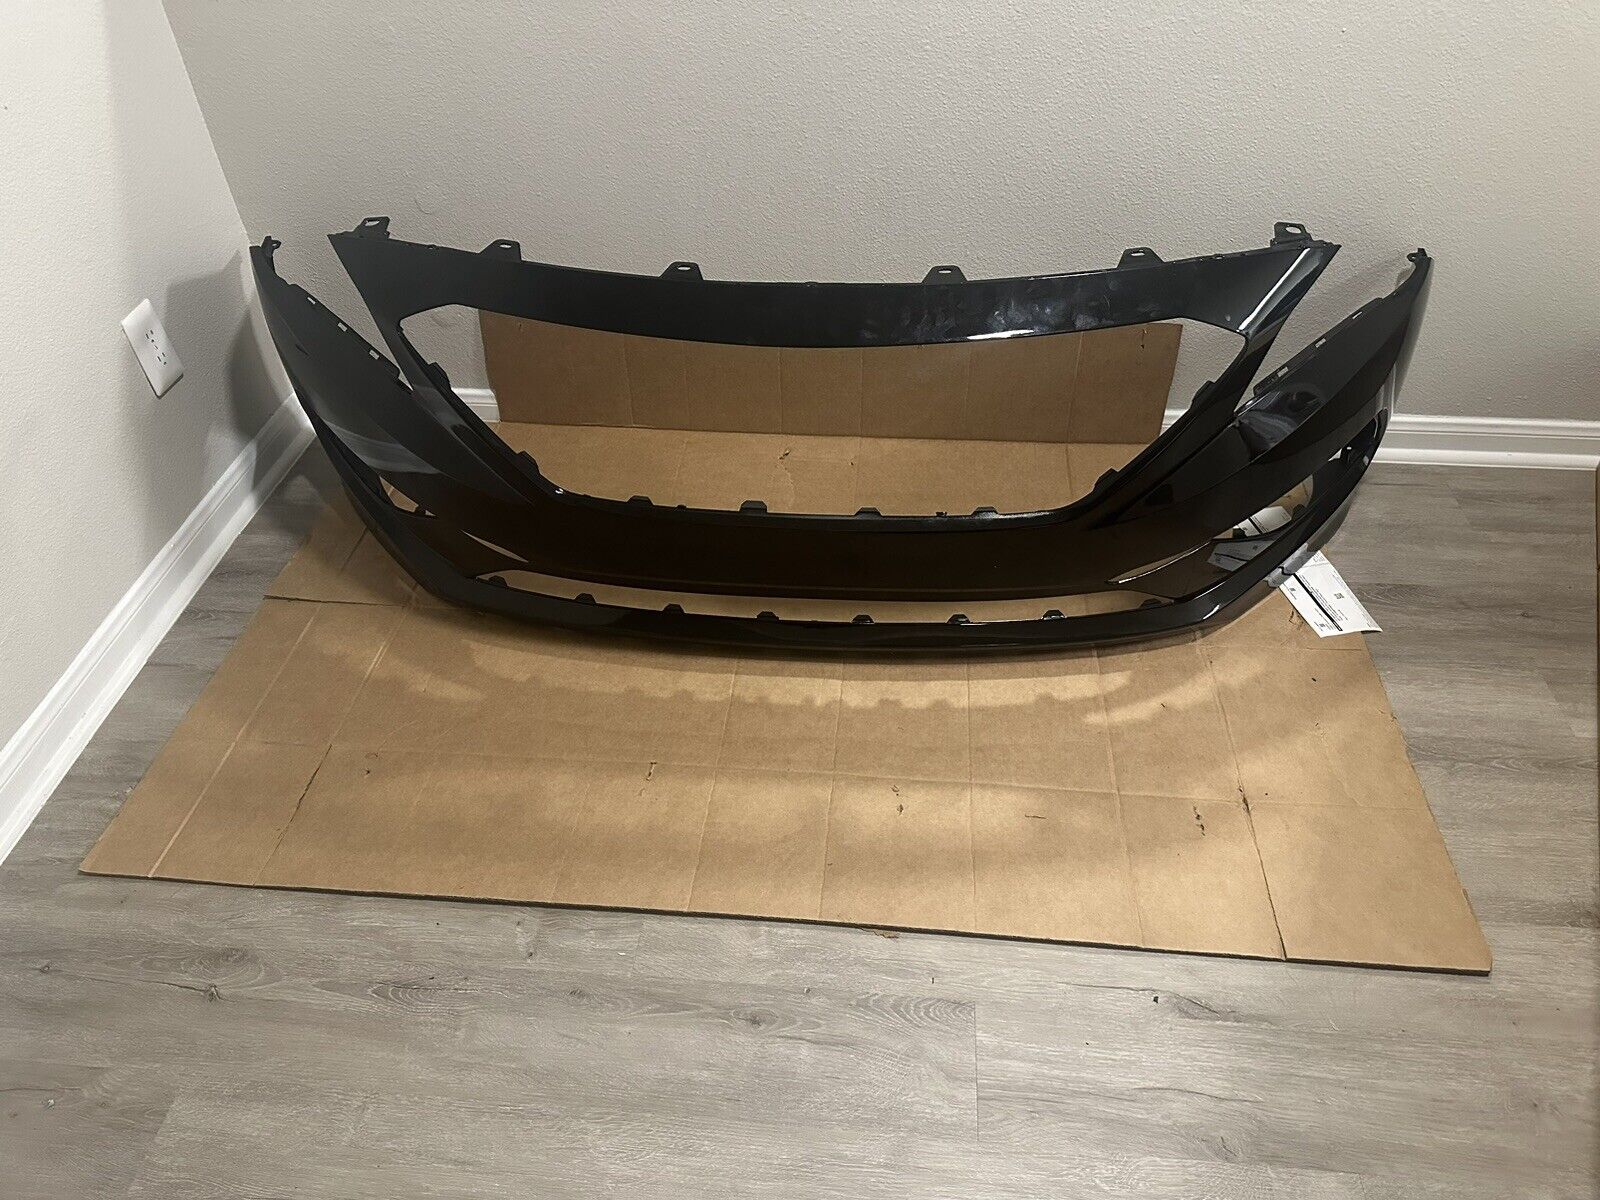 NEW Painted Unfolded Front Bumper For 2015 2016 2017 Hyundai Sonata Non-Hybrid